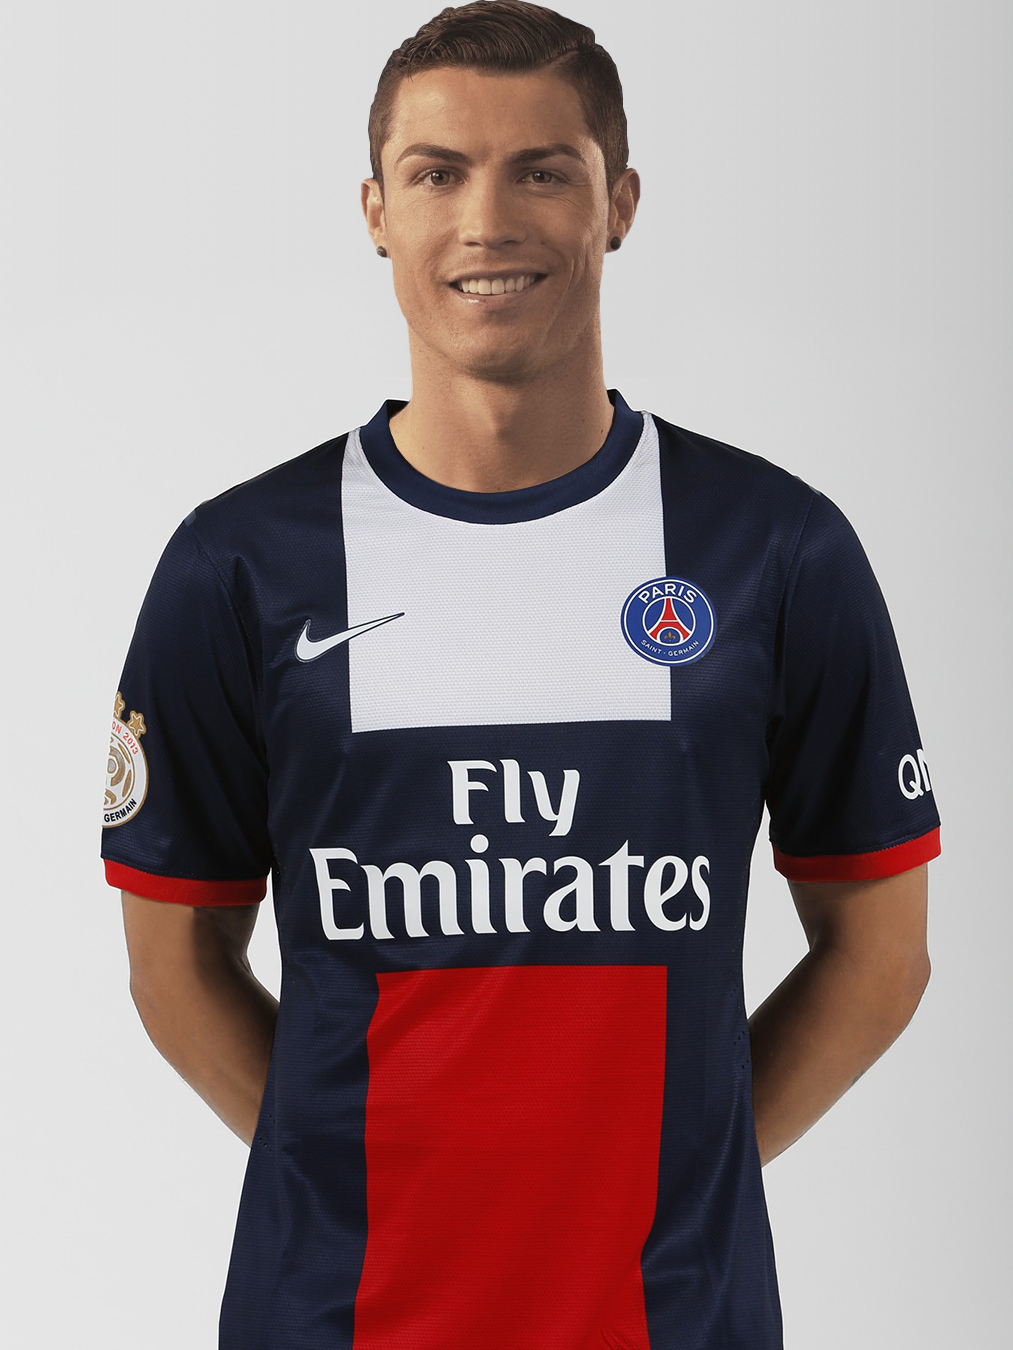 Soccerbe | Everything on Football: Shock: Cristiano ronaldo moved in PSG